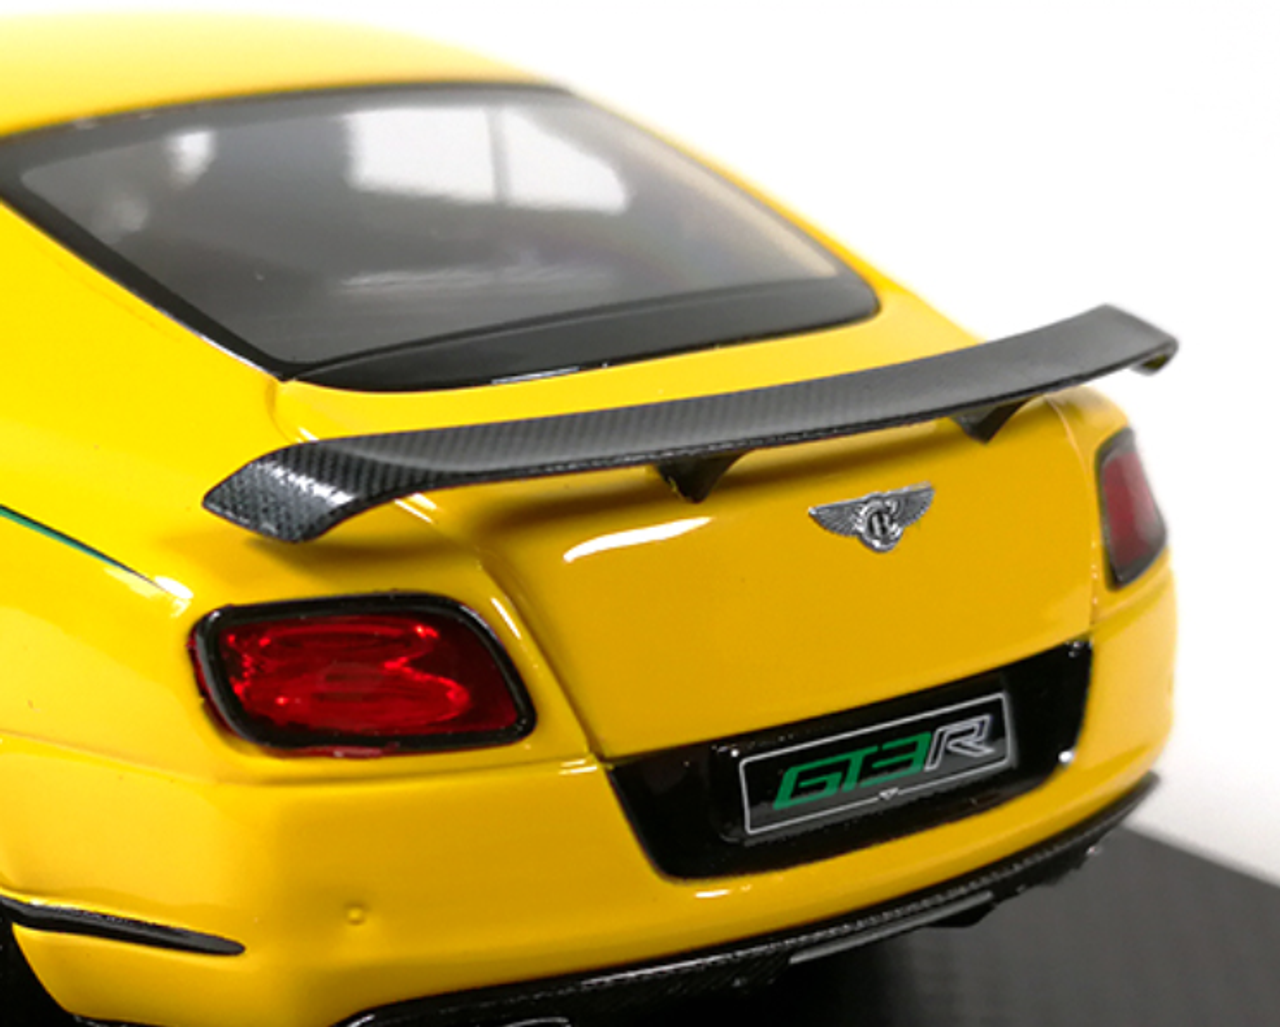 1/43 Almost Real Almostreal Bentley Continental GT3R GT3-R (Yellow) Car Model